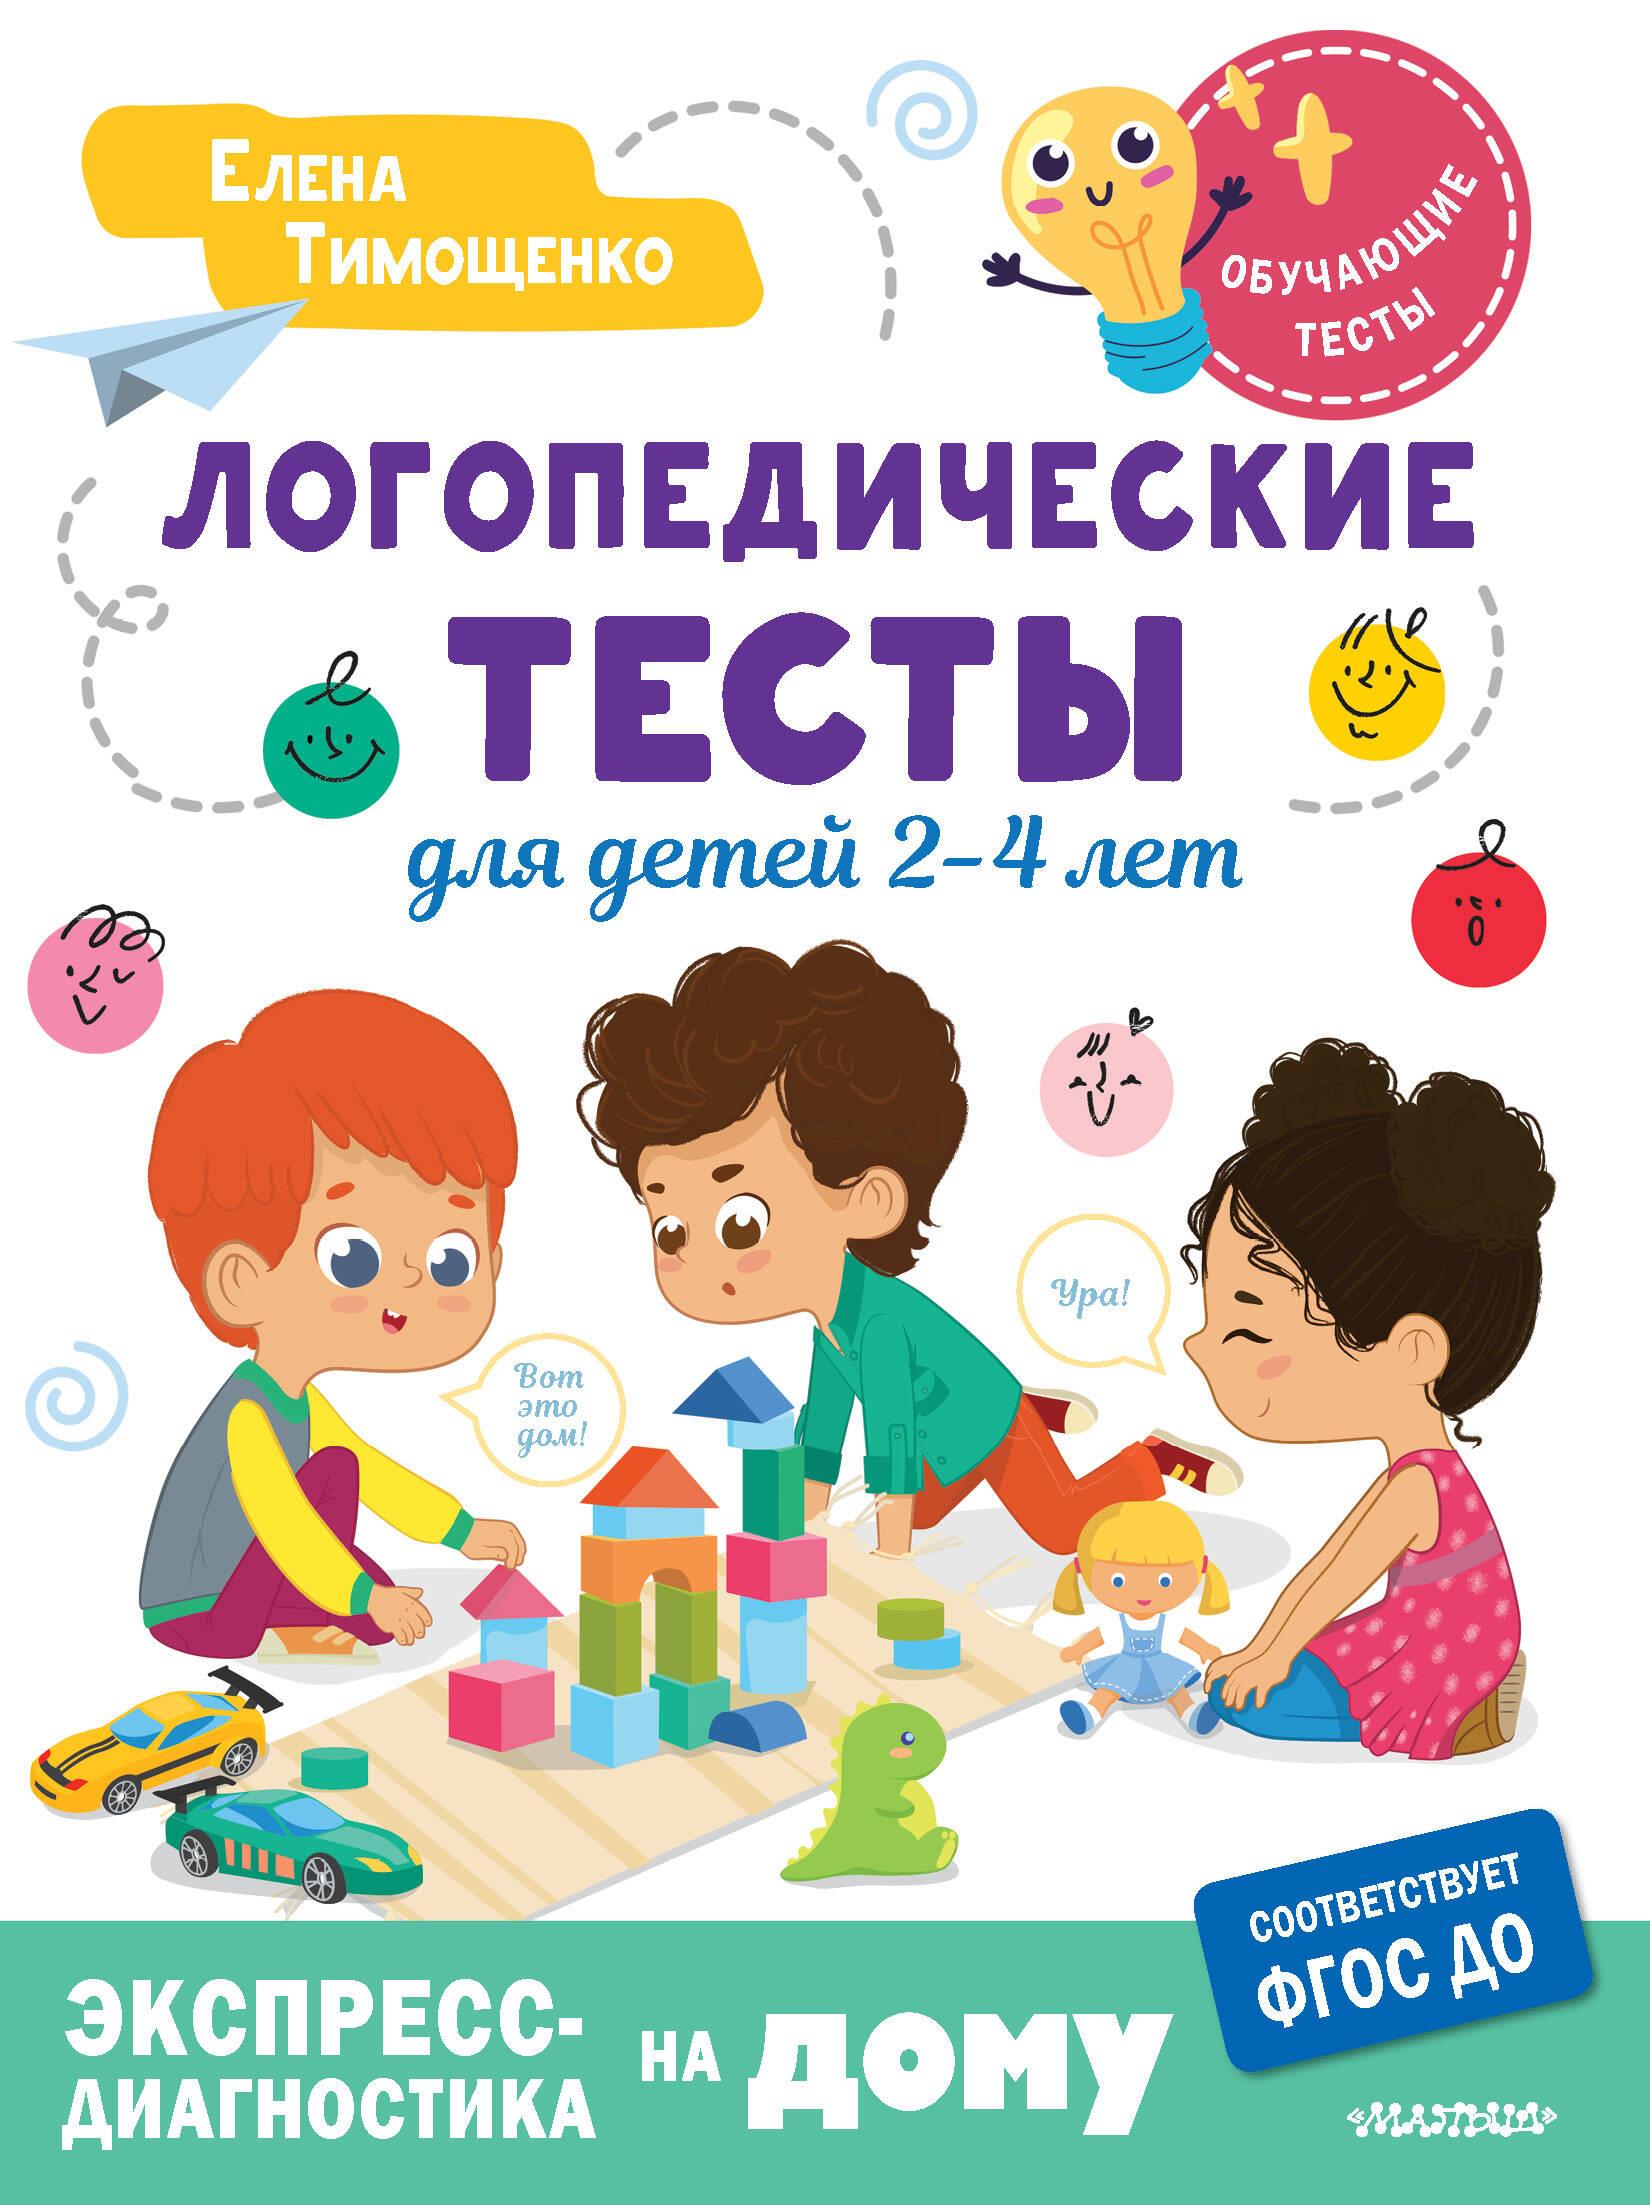 Speech therapy tests for children 2-4 years old